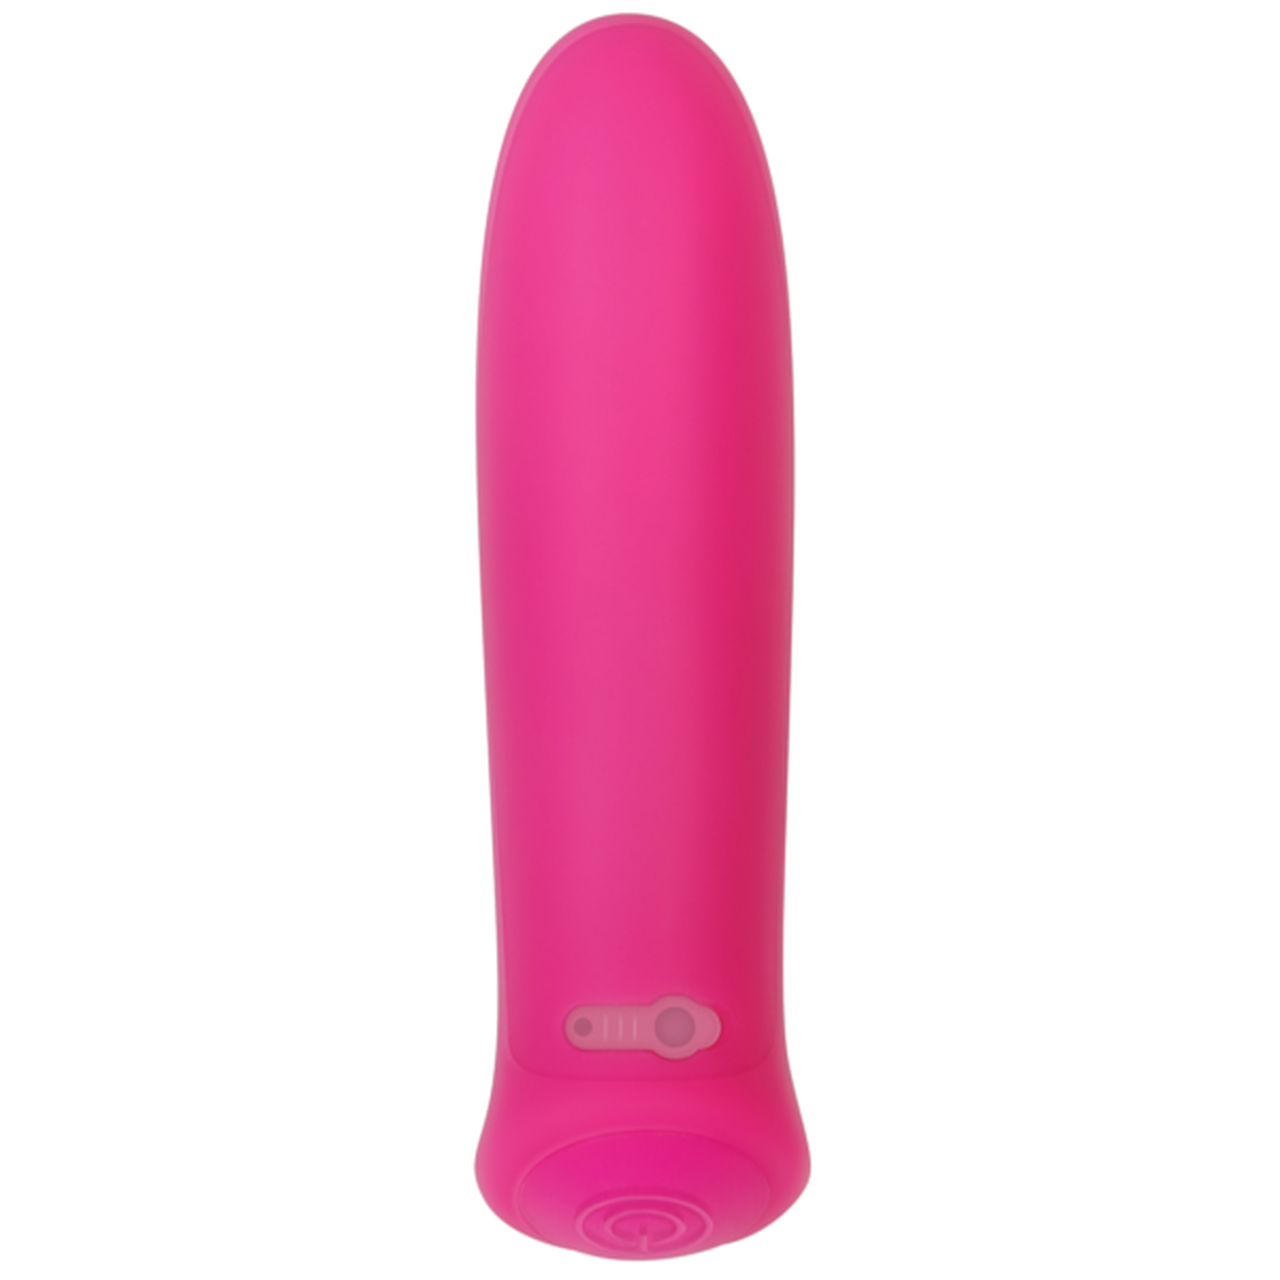 Evolved Pretty in Pink Bullet - XOXTOYS